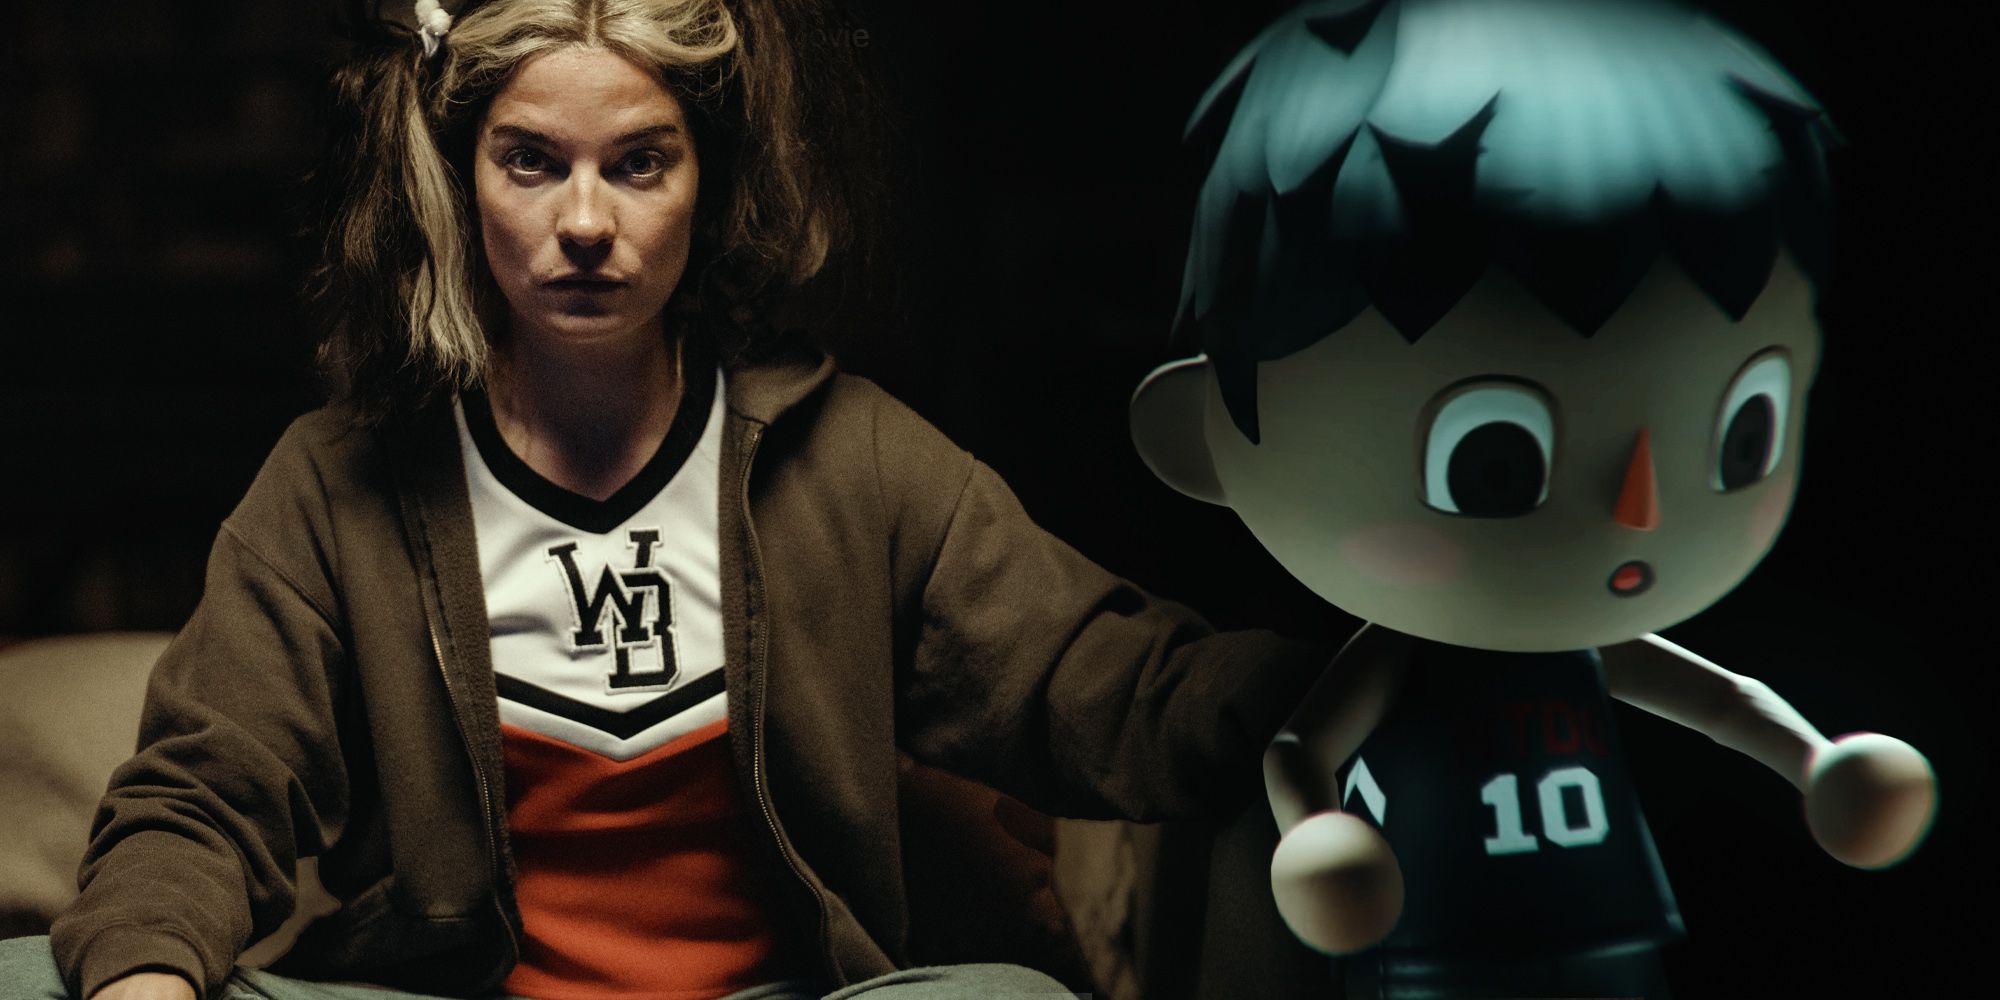 A Black Mirror charcter to the left with an Animal Crossing character to the right, both surrounded by a dark background.